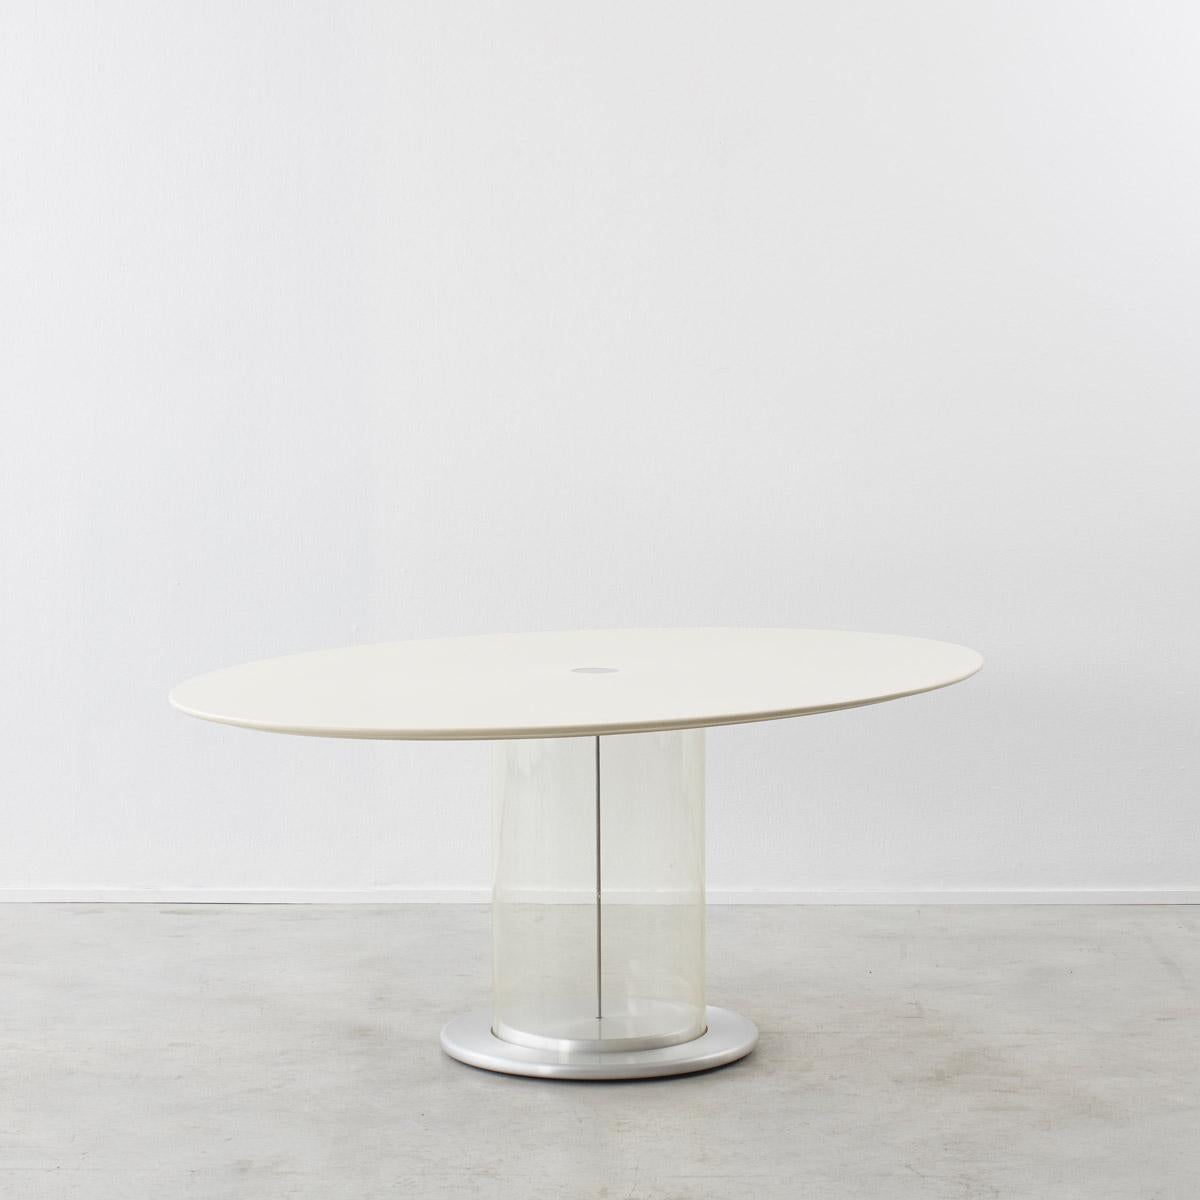 Claudio Salocchi (1934 to 2012) was a highly regarded designer and architect, known for detailed research into furniture layouts. As a result, we see innovative compositions without compromise on function. This oval dining table design draws your